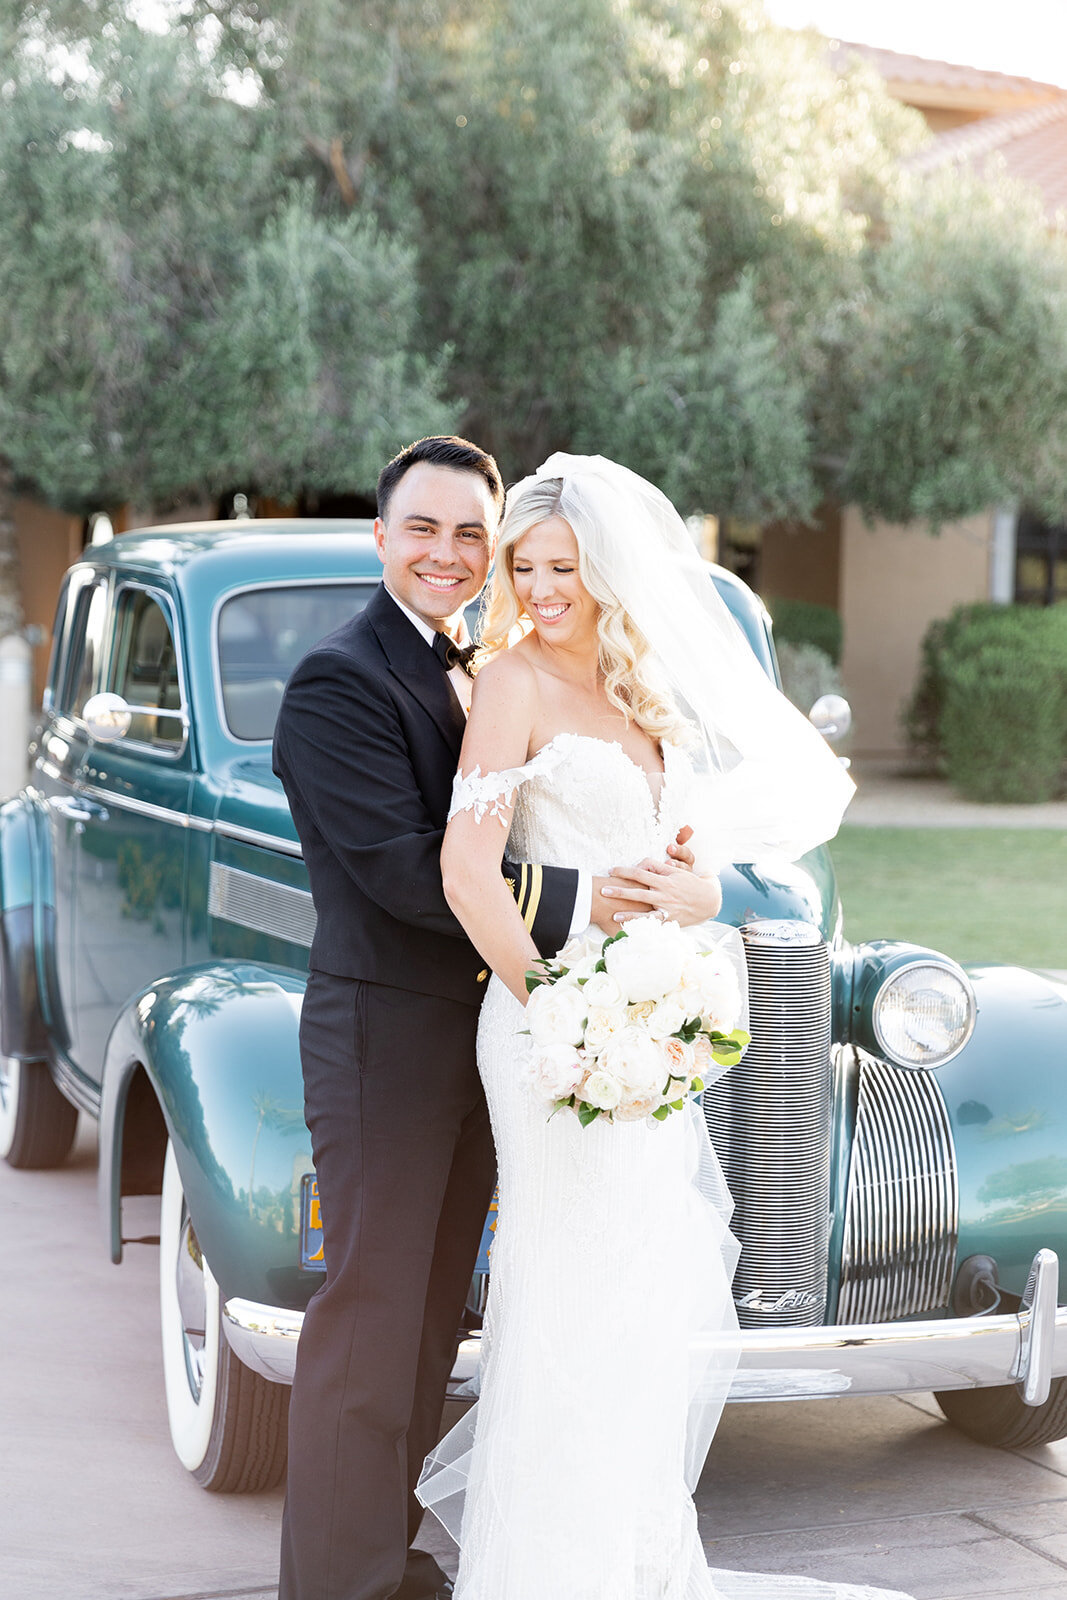 Karlie Colleen Photography - Holly & Ronnie Wedding - Seville Country Club - Gilbert Arizona-687